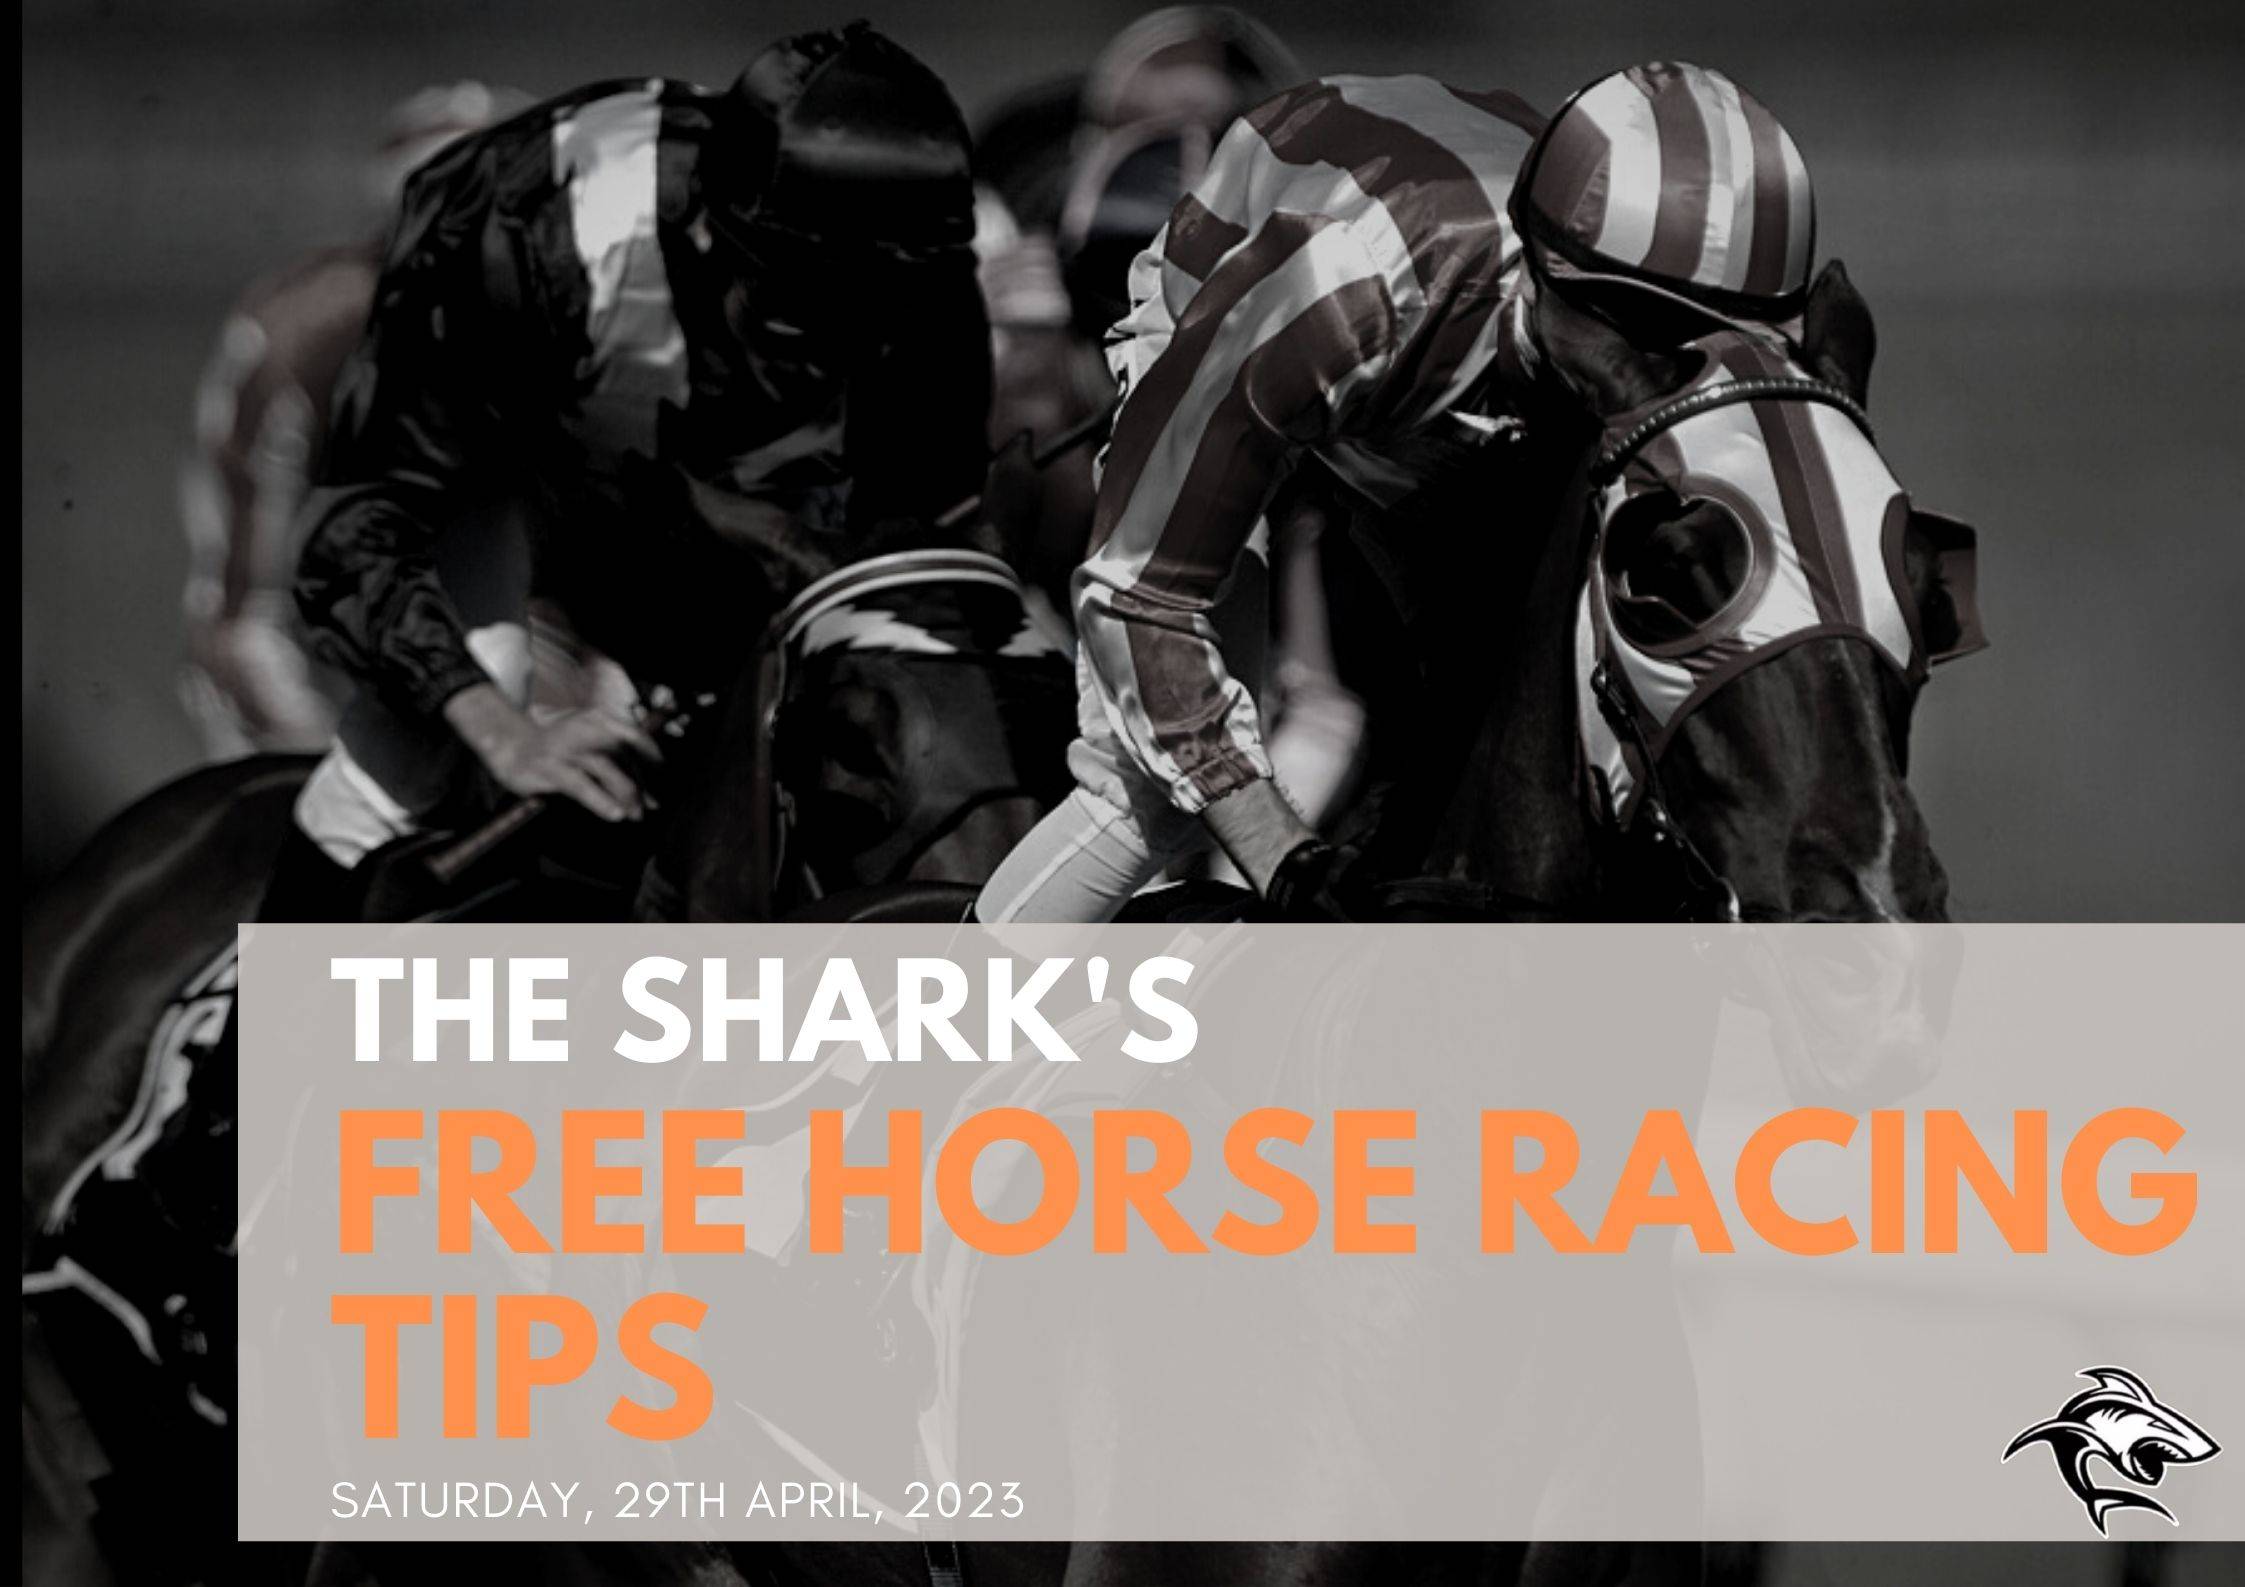 Free Horse Racing Tips - 29th Apr